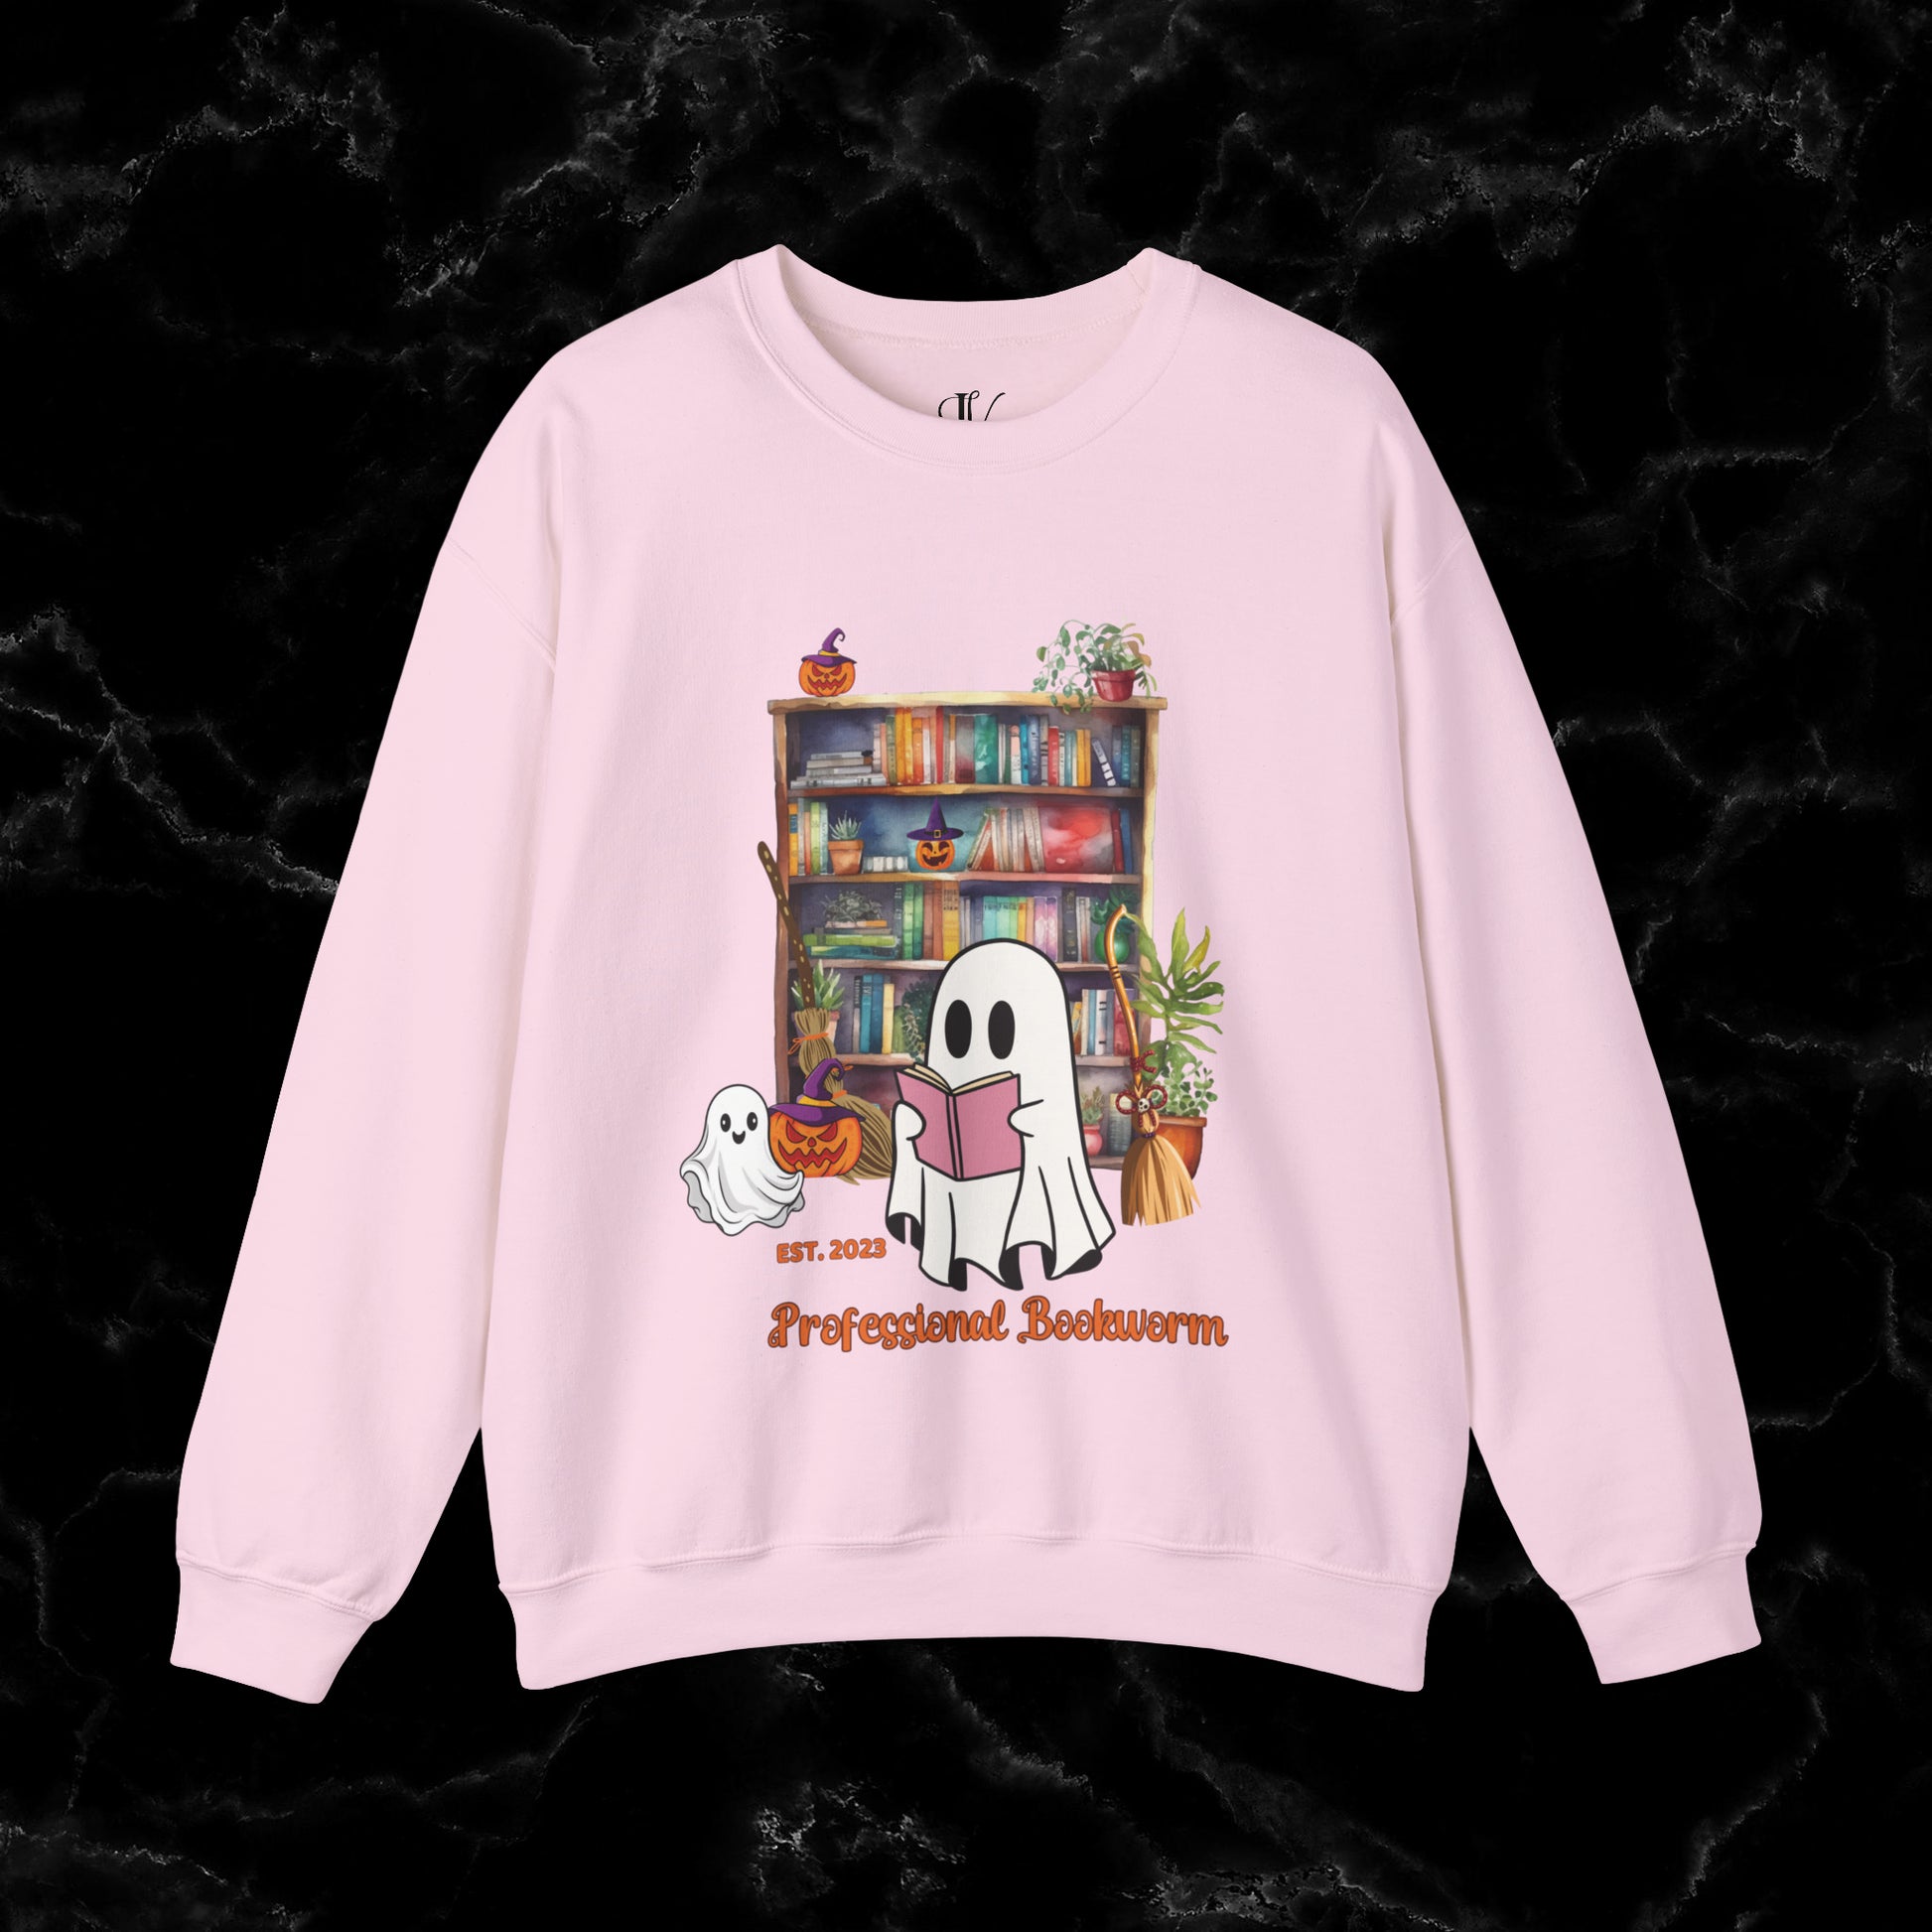 Witchy Gifts for Book Lover Cottagecore Pumpkin Witch Sweatshirt - Bookworm Back To School Reading Fall Sweater, Perfect Present for Bookworm Aunt's Birthday Sweatshirt S Light Pink 